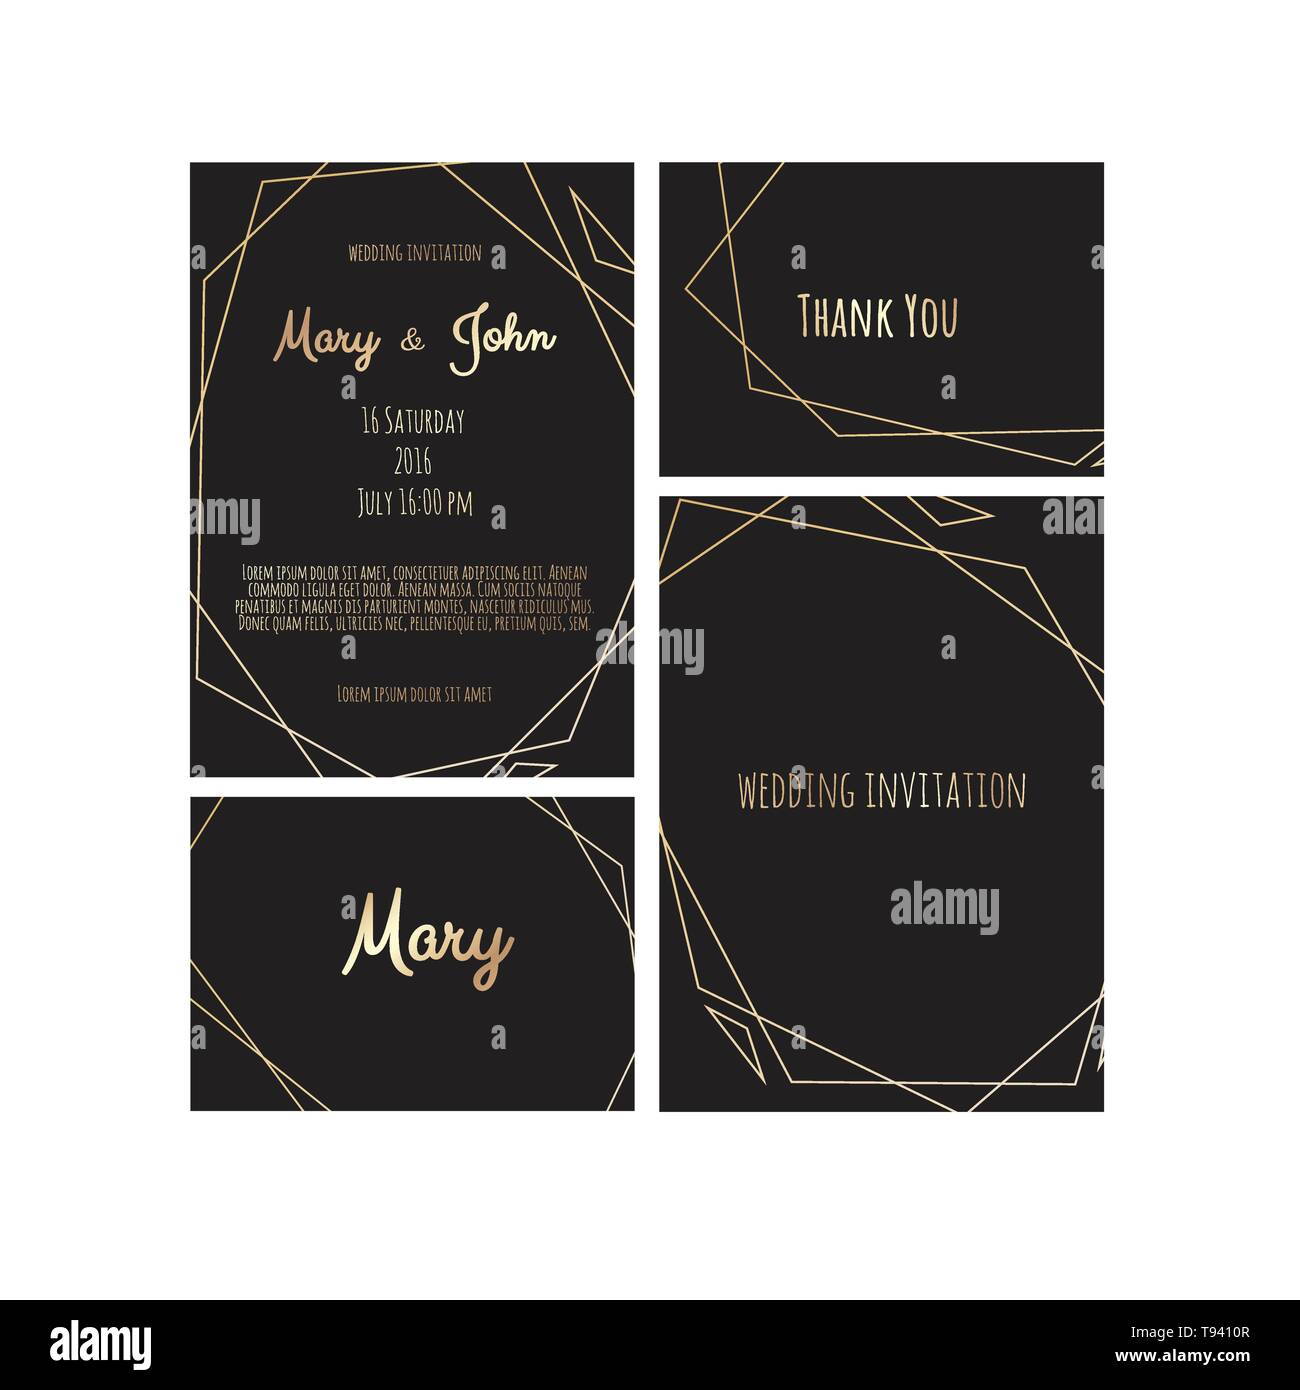 Wedding Invitation, invite card design with Geometrical art lines, gold foil border, frame. Vector modern geometric abstract template layout. Stock Vector